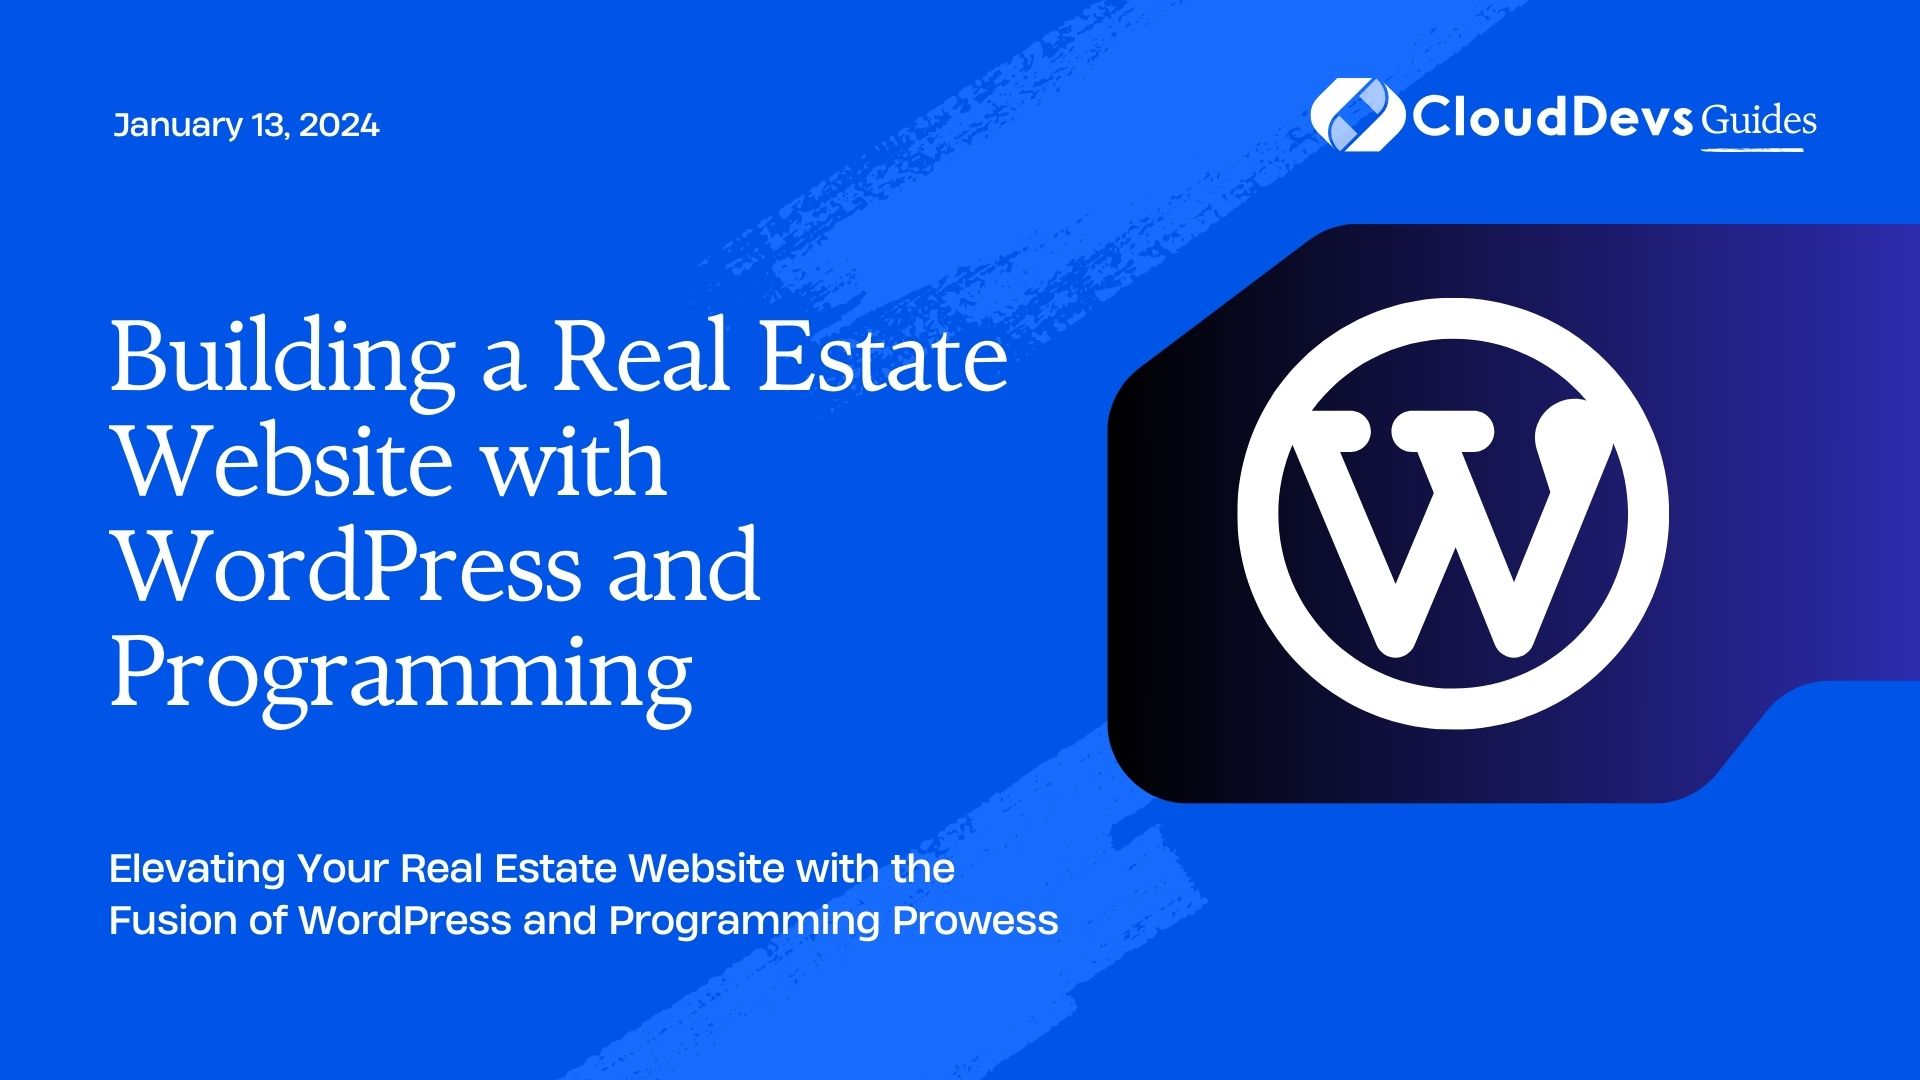 Building a Real Estate Website with WordPress and Programming